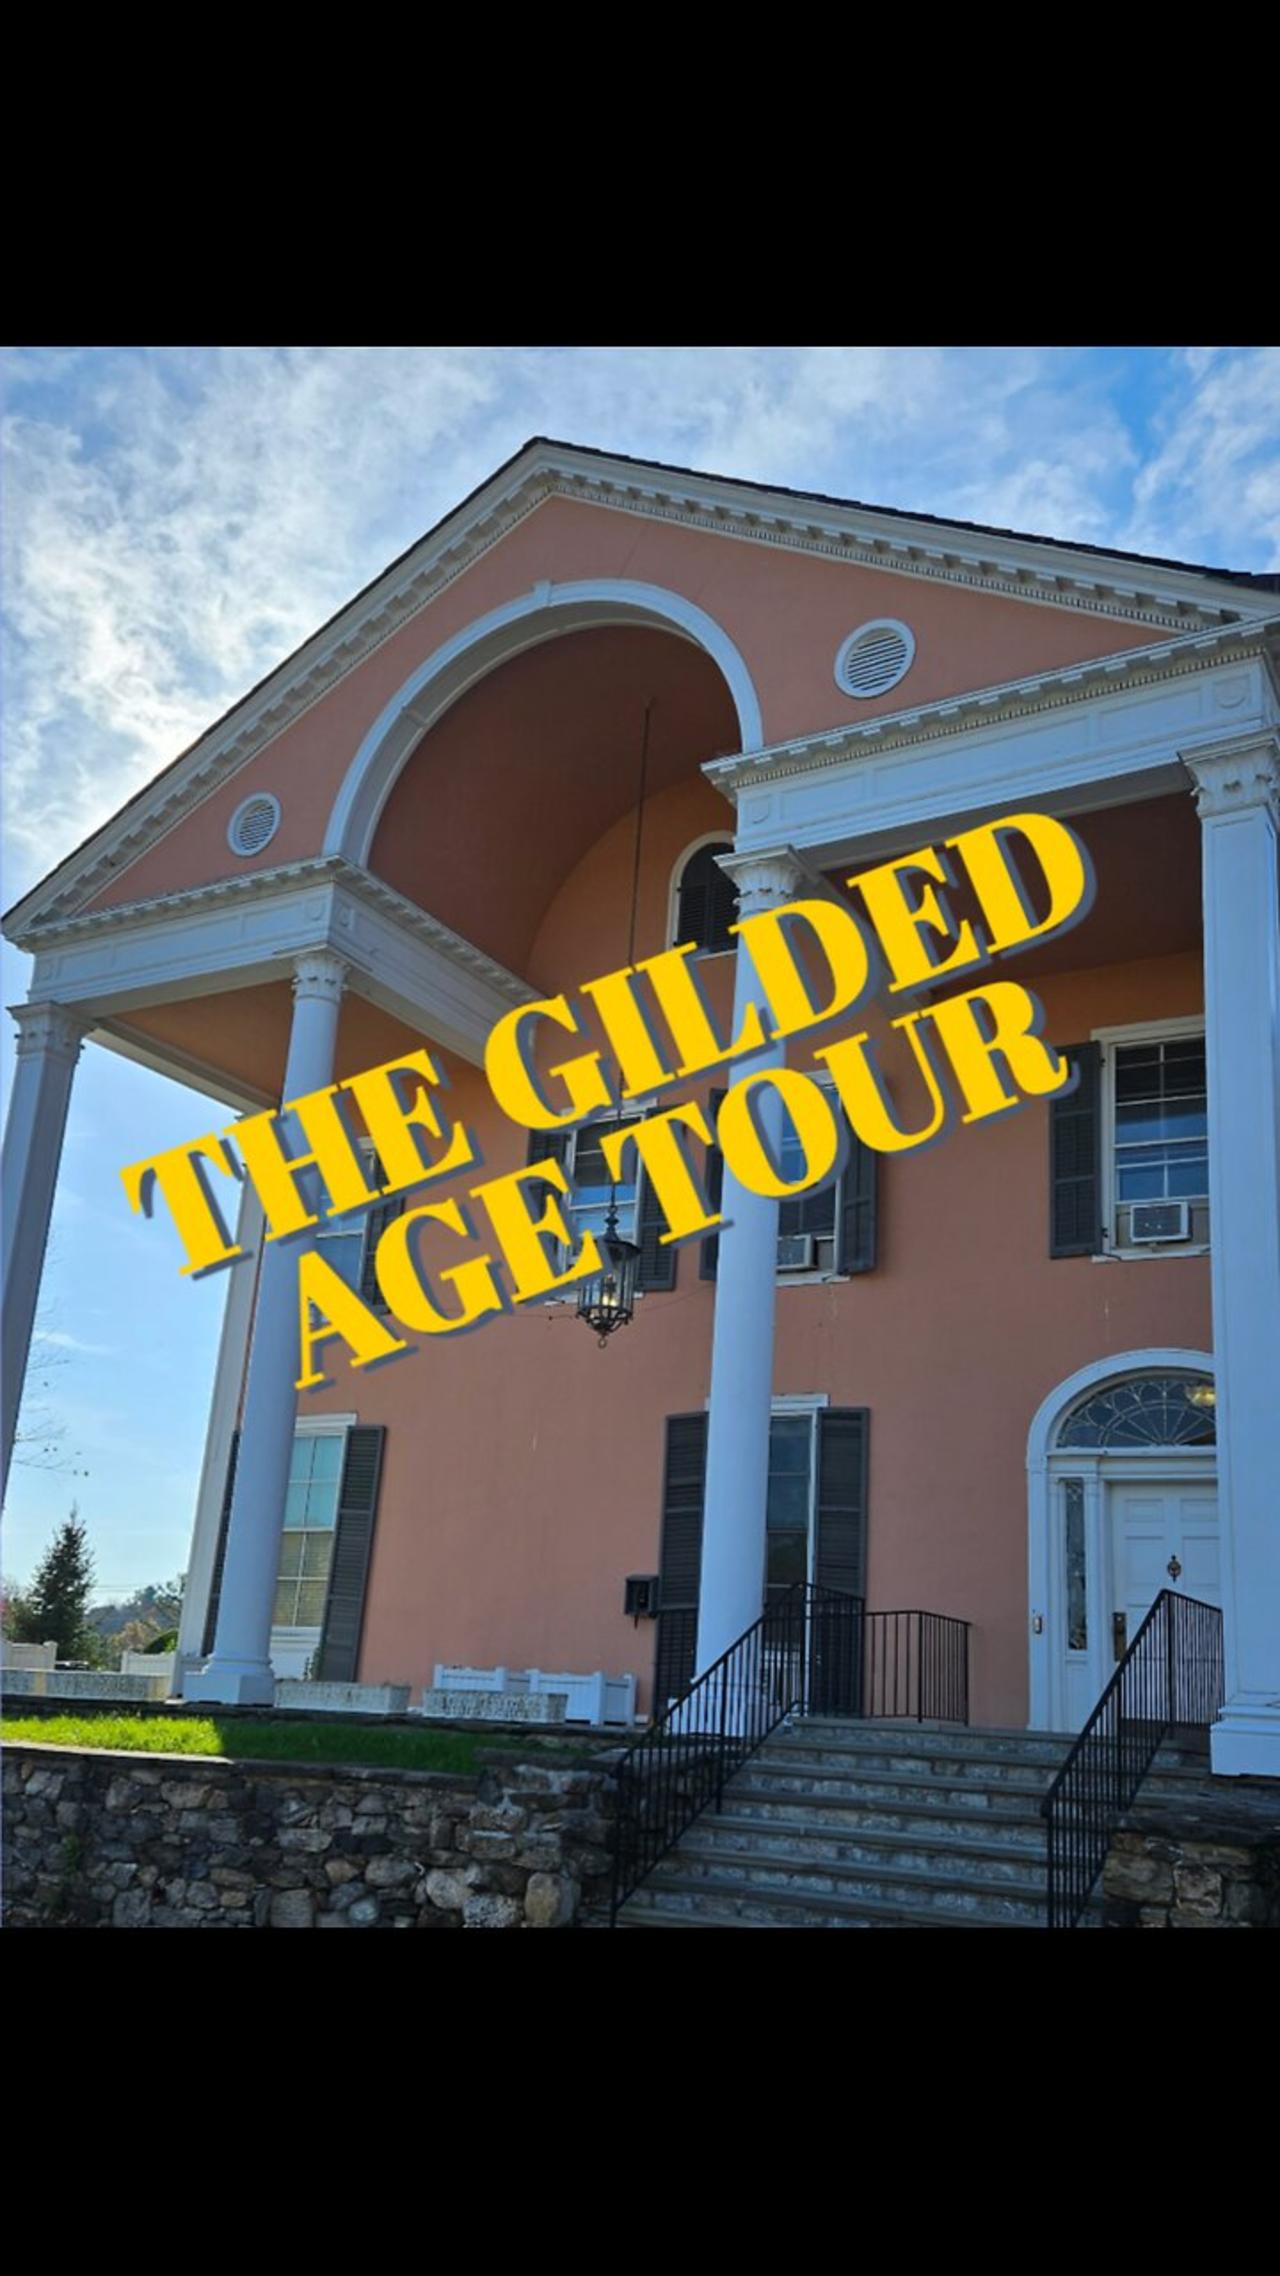 Let's tour the The Gilded age sets in New York 2023 #tvshow